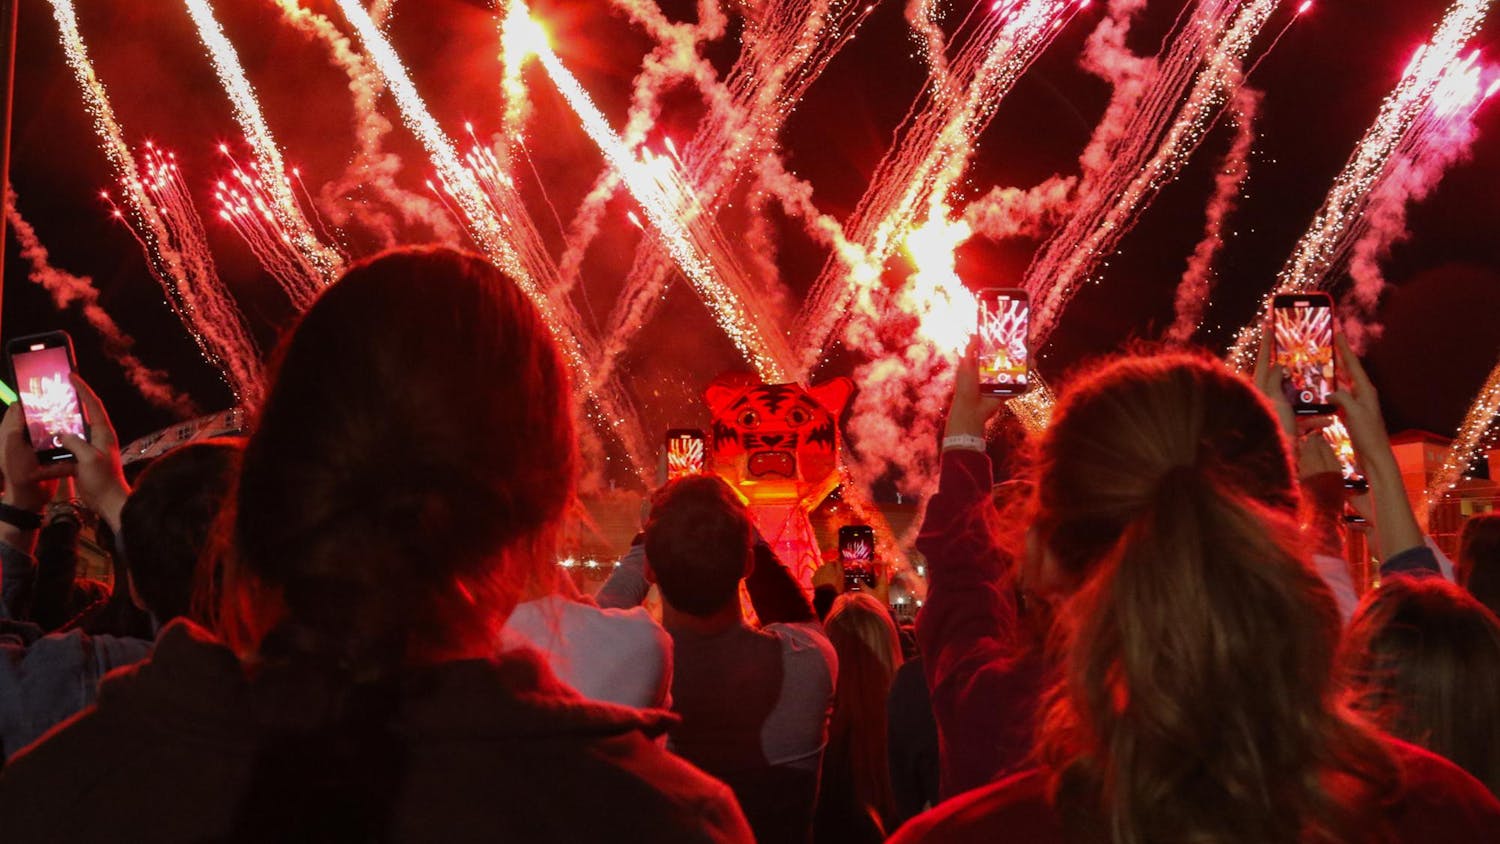 University of South Carolina students watch and record the wooden tiger go up in flames at the annual Tiger Burn celebration. The burning tiger was accompanied by fireworks and other festivities on Nov. 20, 2023.